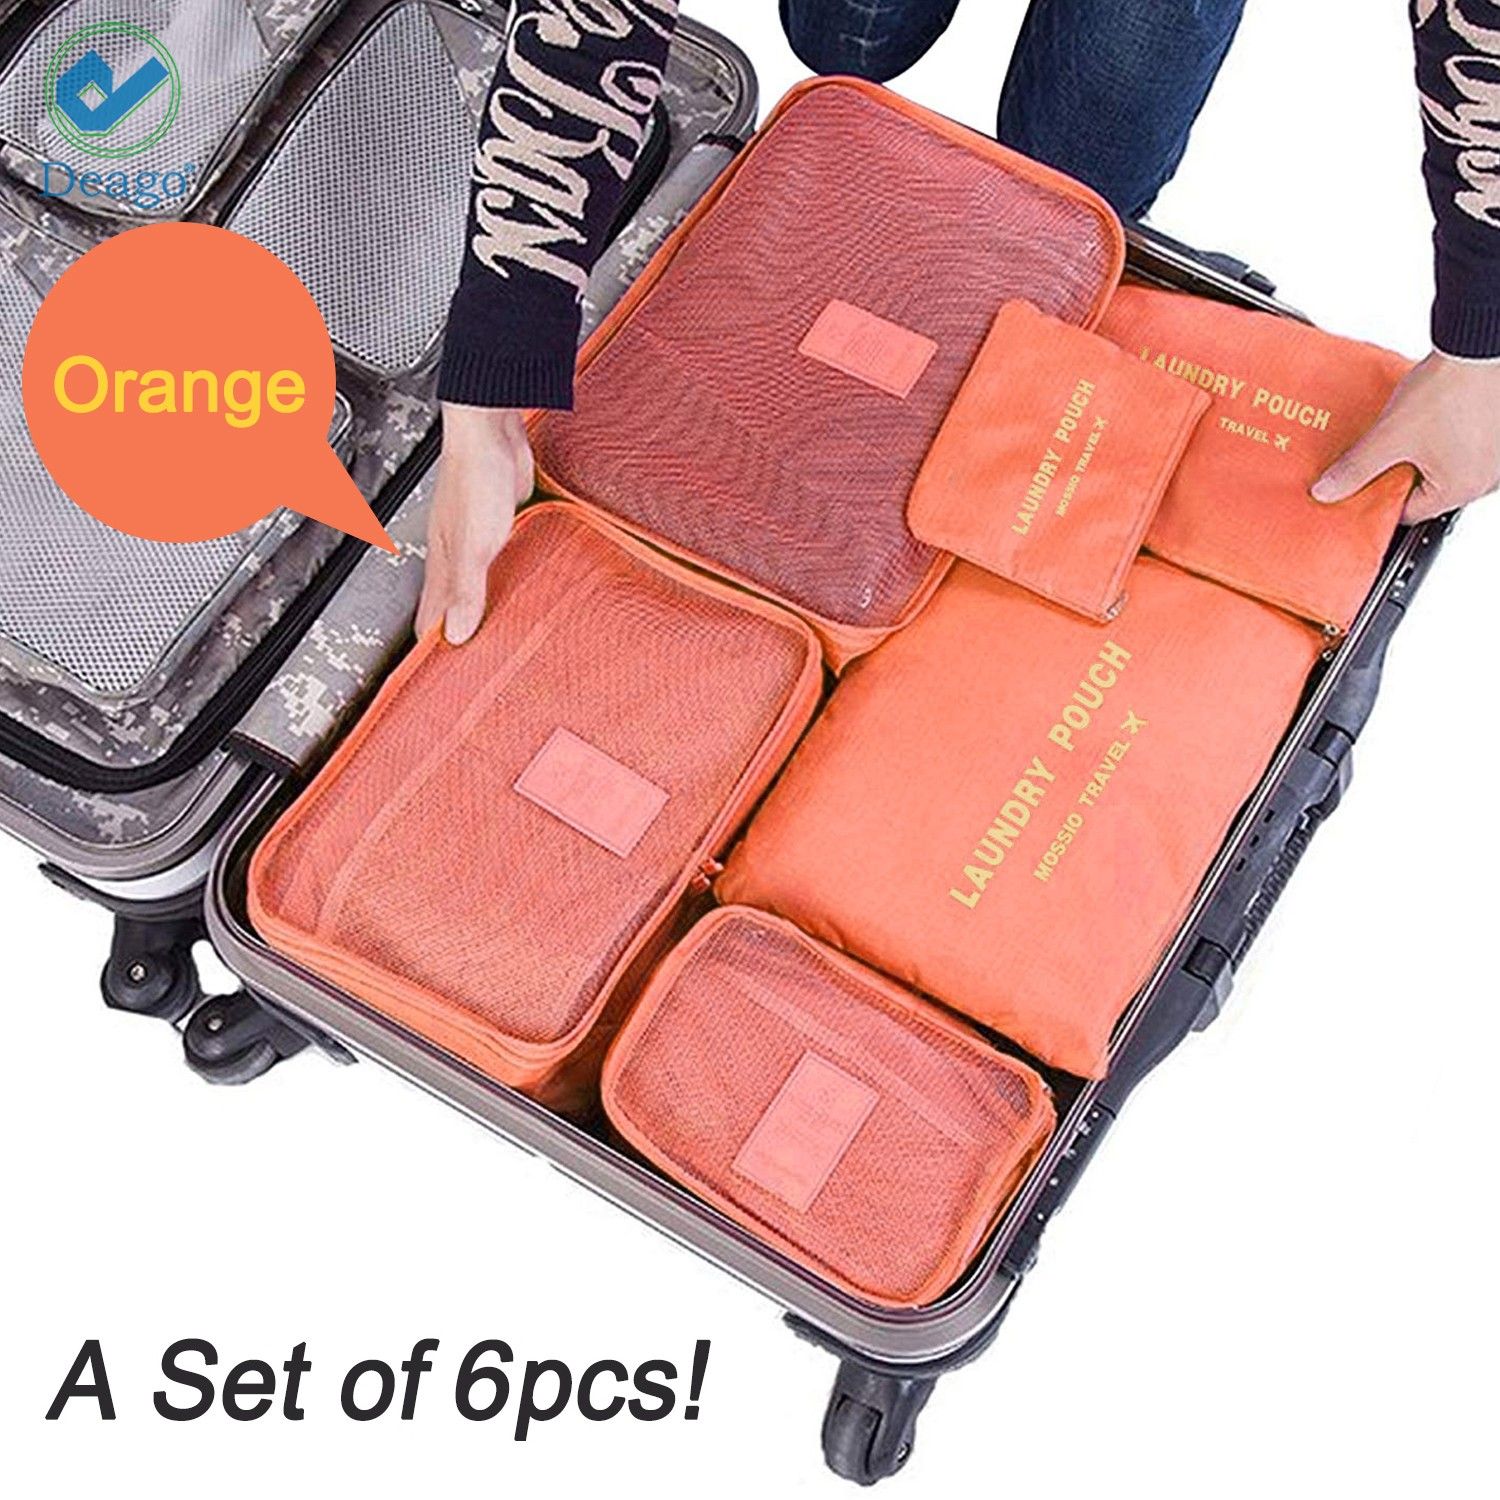 Formal Shirt Travel Storage Bag Clothes Packing Luggage Organizers with Zipper S